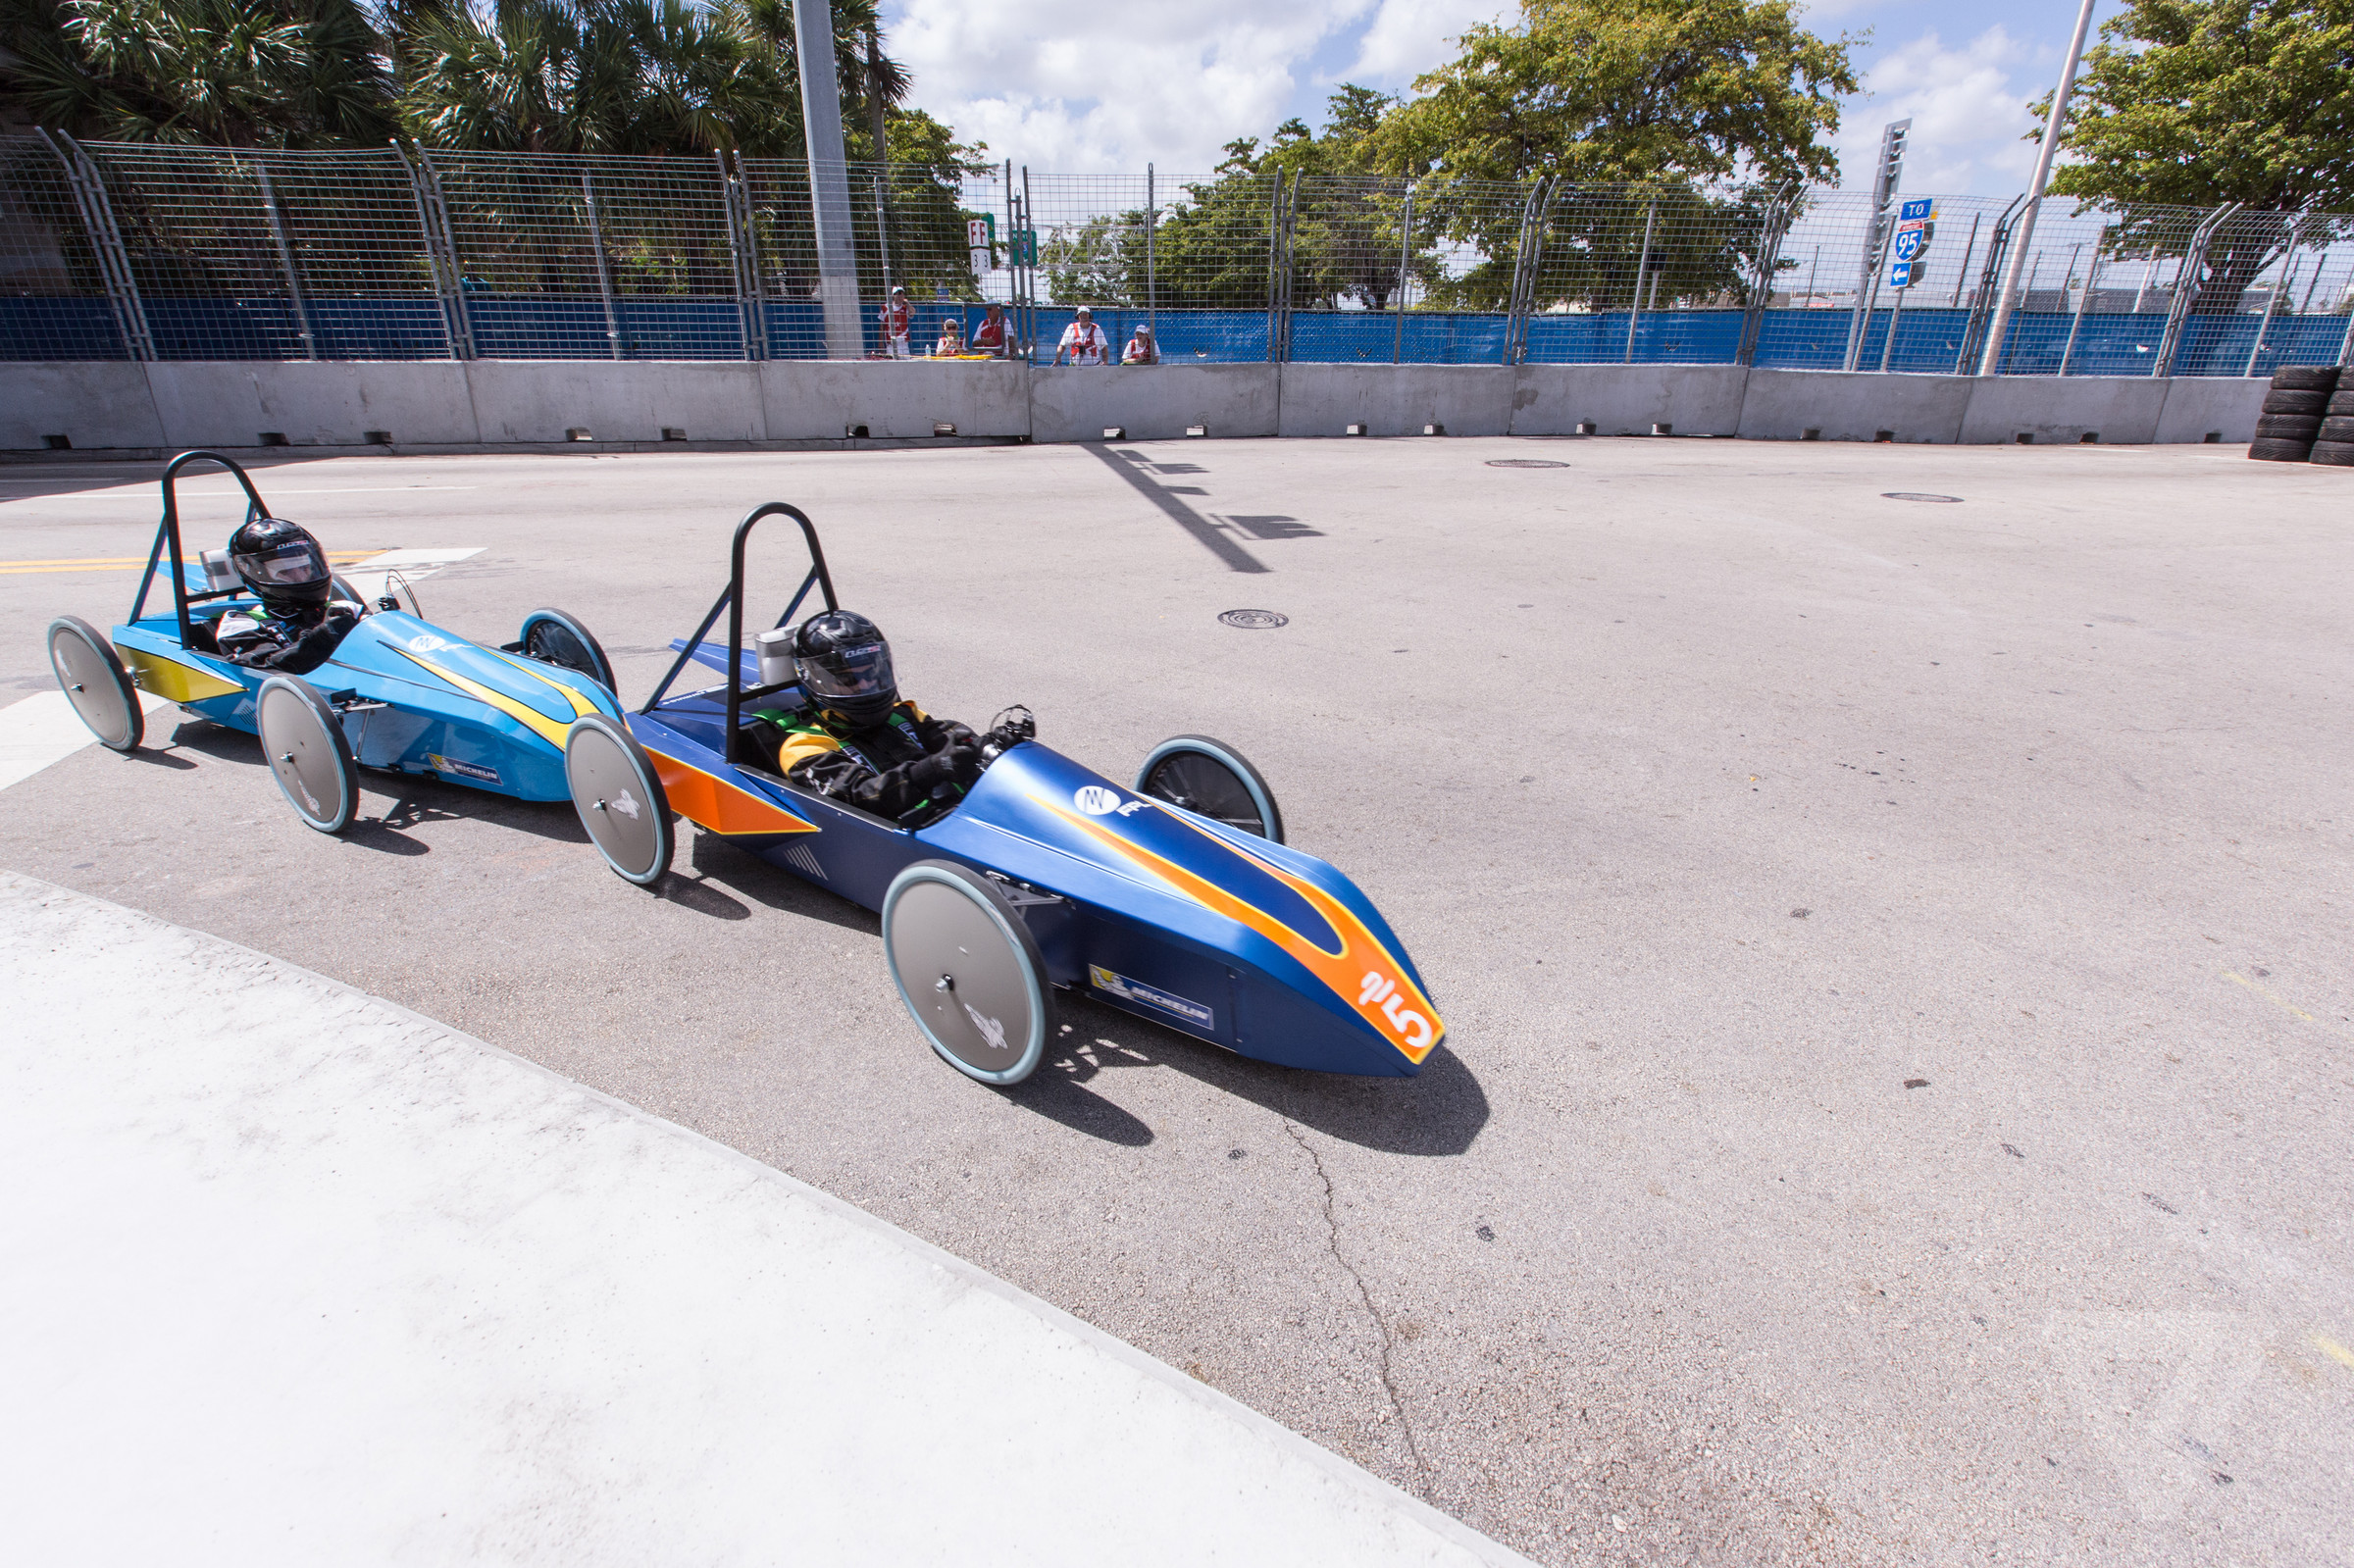 School Series electric kit car competition